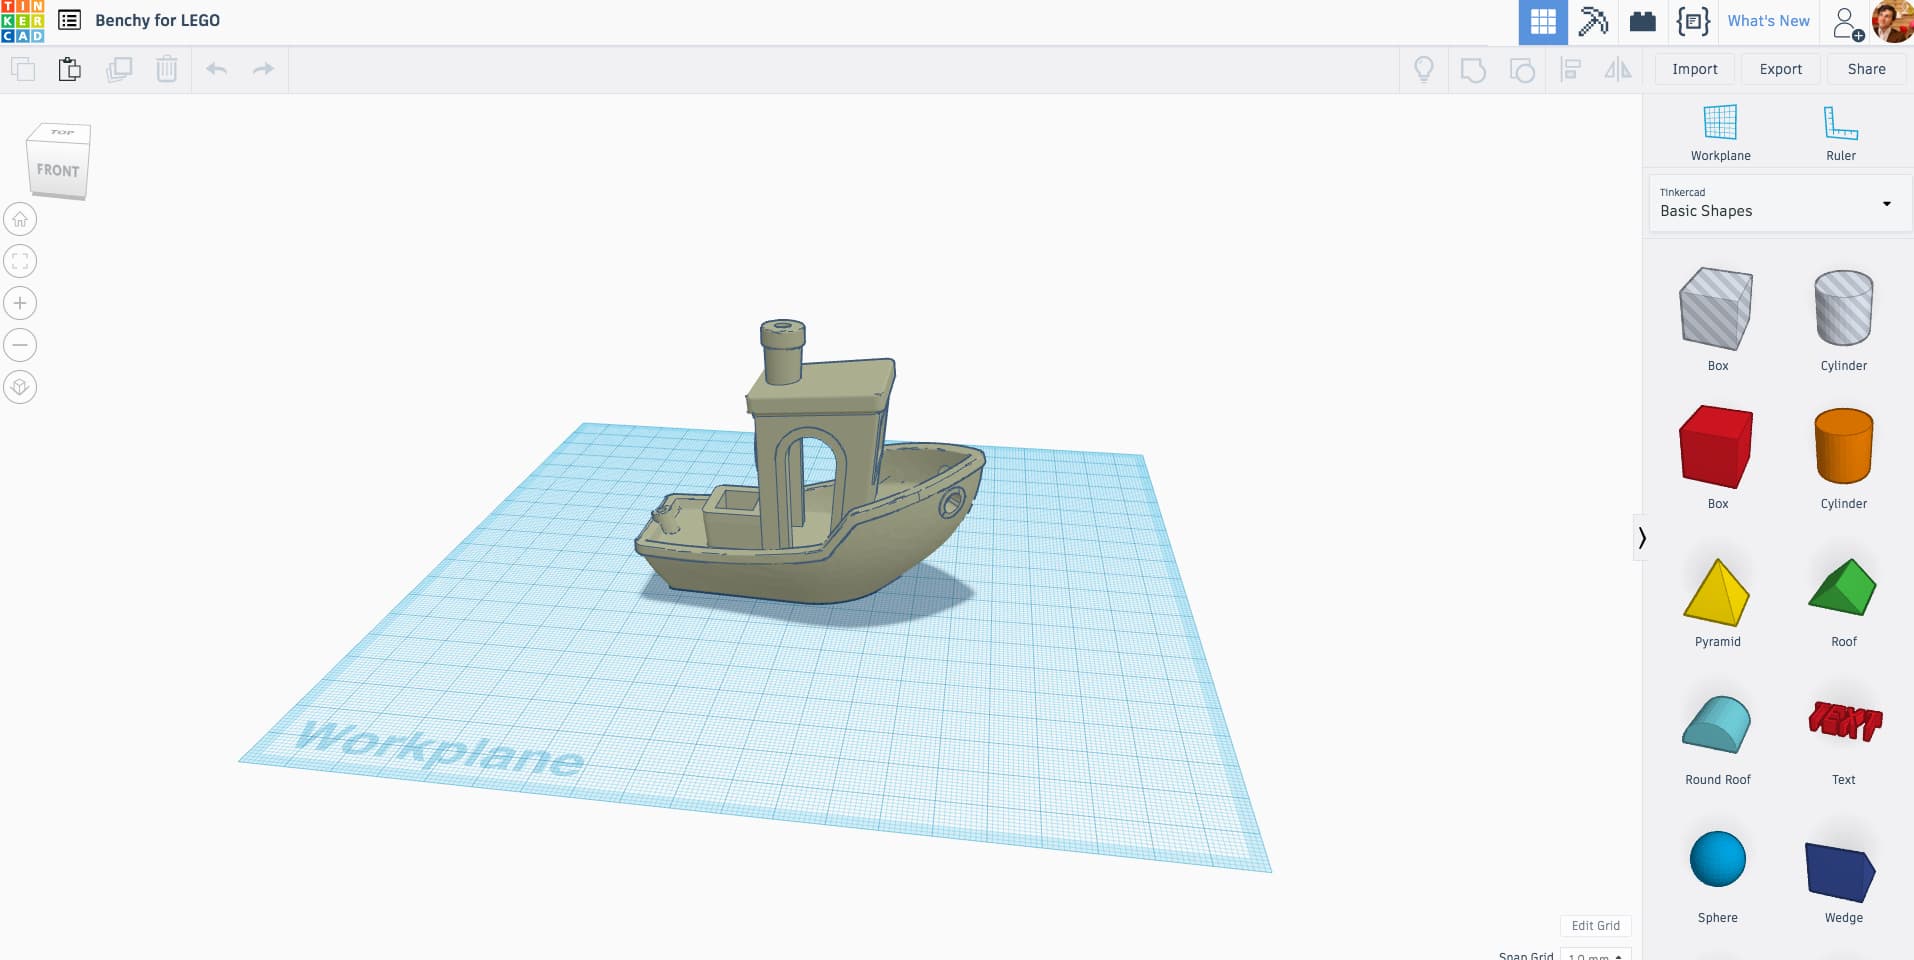 3d printing software free download msxml 4.0 download win 10